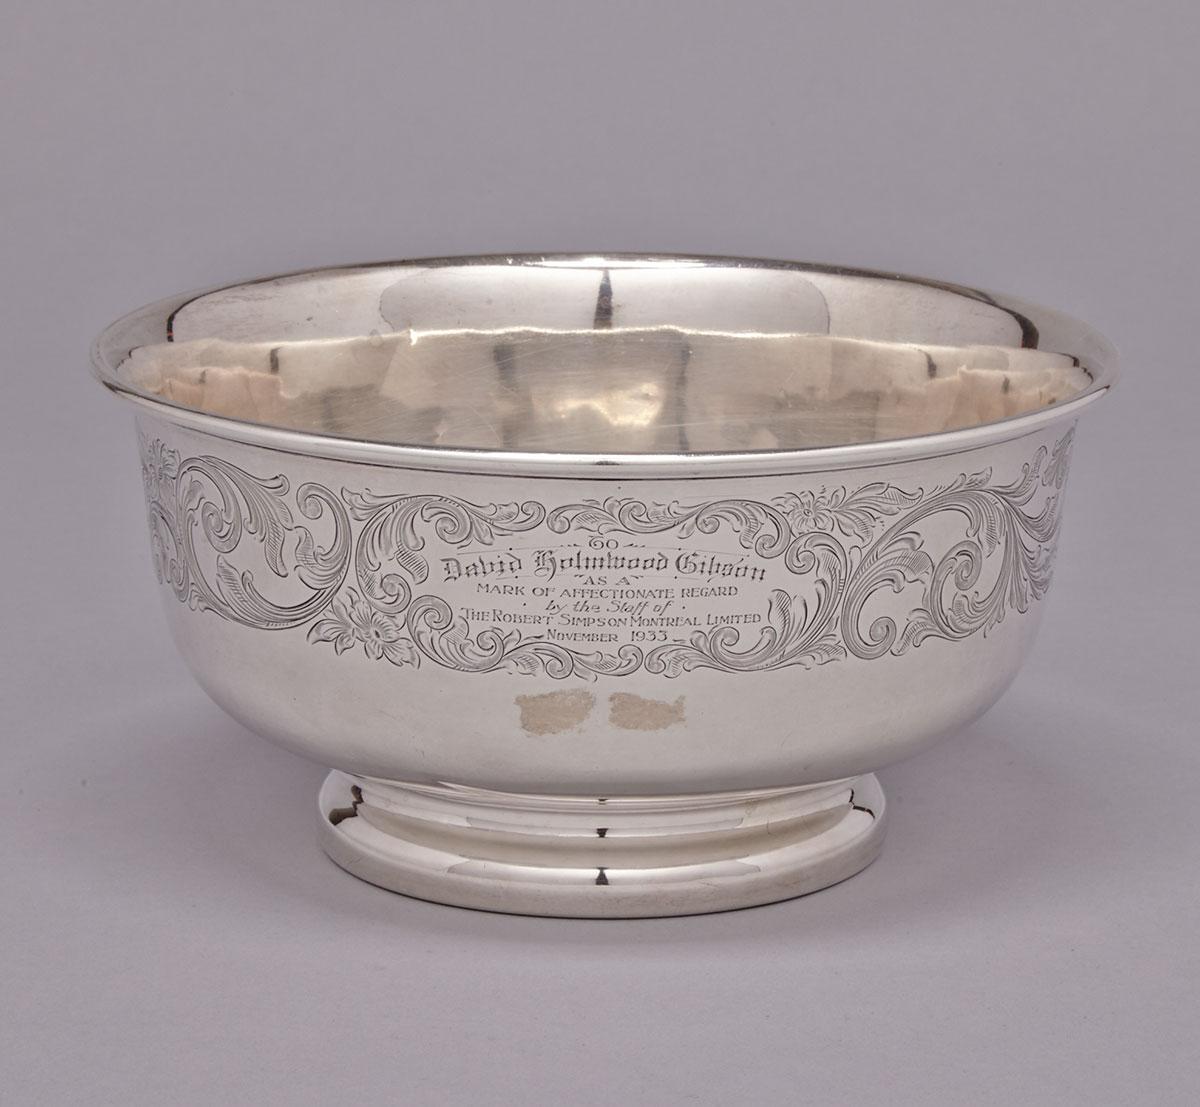 Canadian Silver Rose Bowl, Henry Birks & Sons, Montreal, Que., 1932